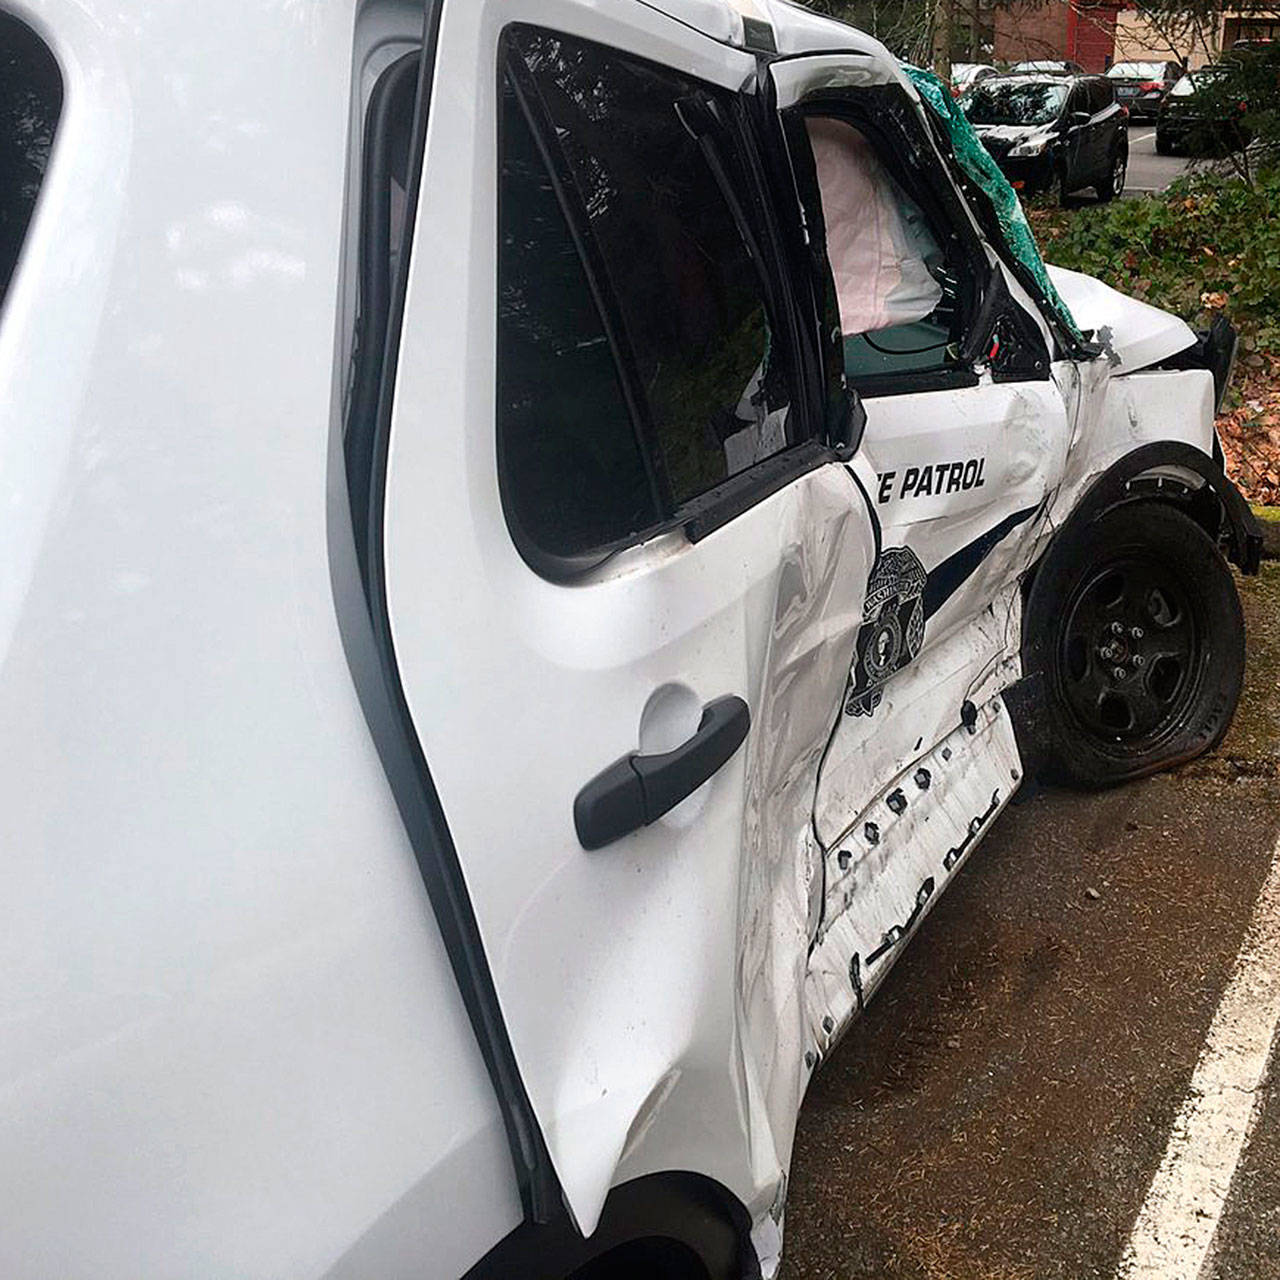 A State Patrol SUV back at patrol offices after a trooper suffered minor injuries in a collision Wednesday morning in Kent at the intersection of Washington Avenue South and State Route 516, aka Willis Street. COURTESY PHOTO, State Patrol